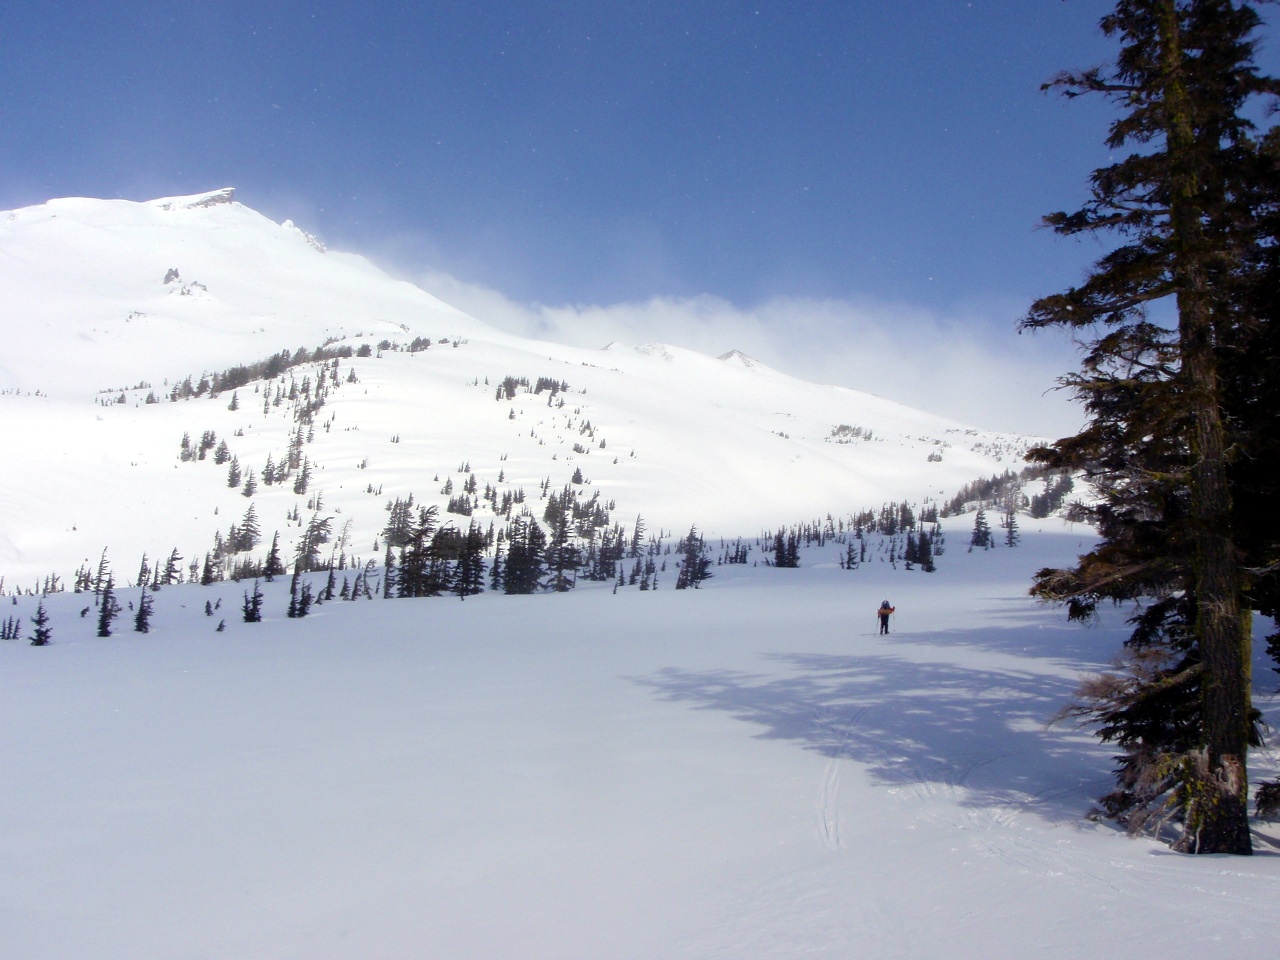 Skiing out of the Green Lakes basin